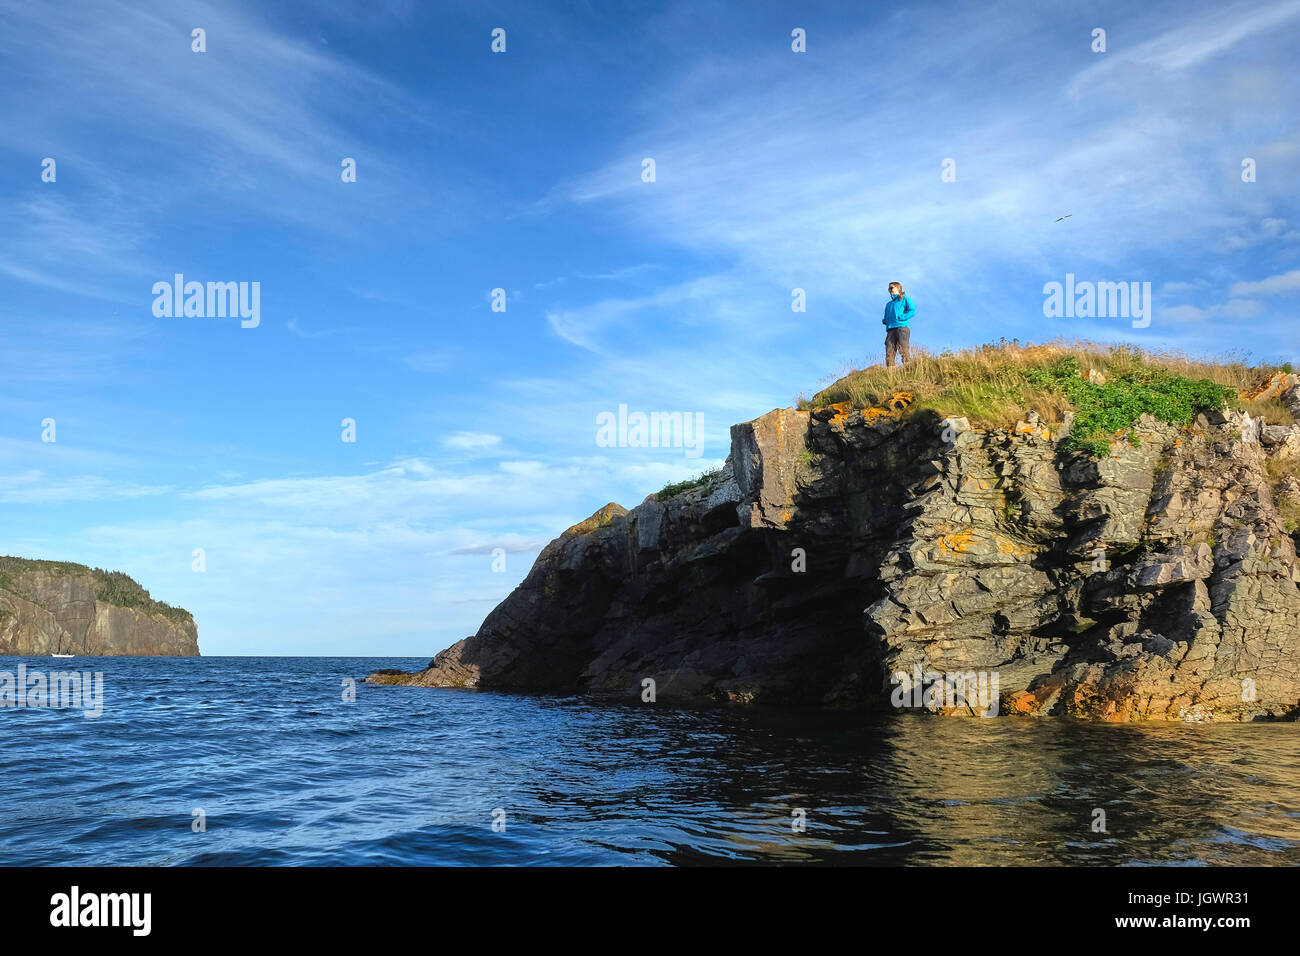 Mid adult woman looking out from coastal cliff, St John's, Newfoundland, Canada Stock Photo